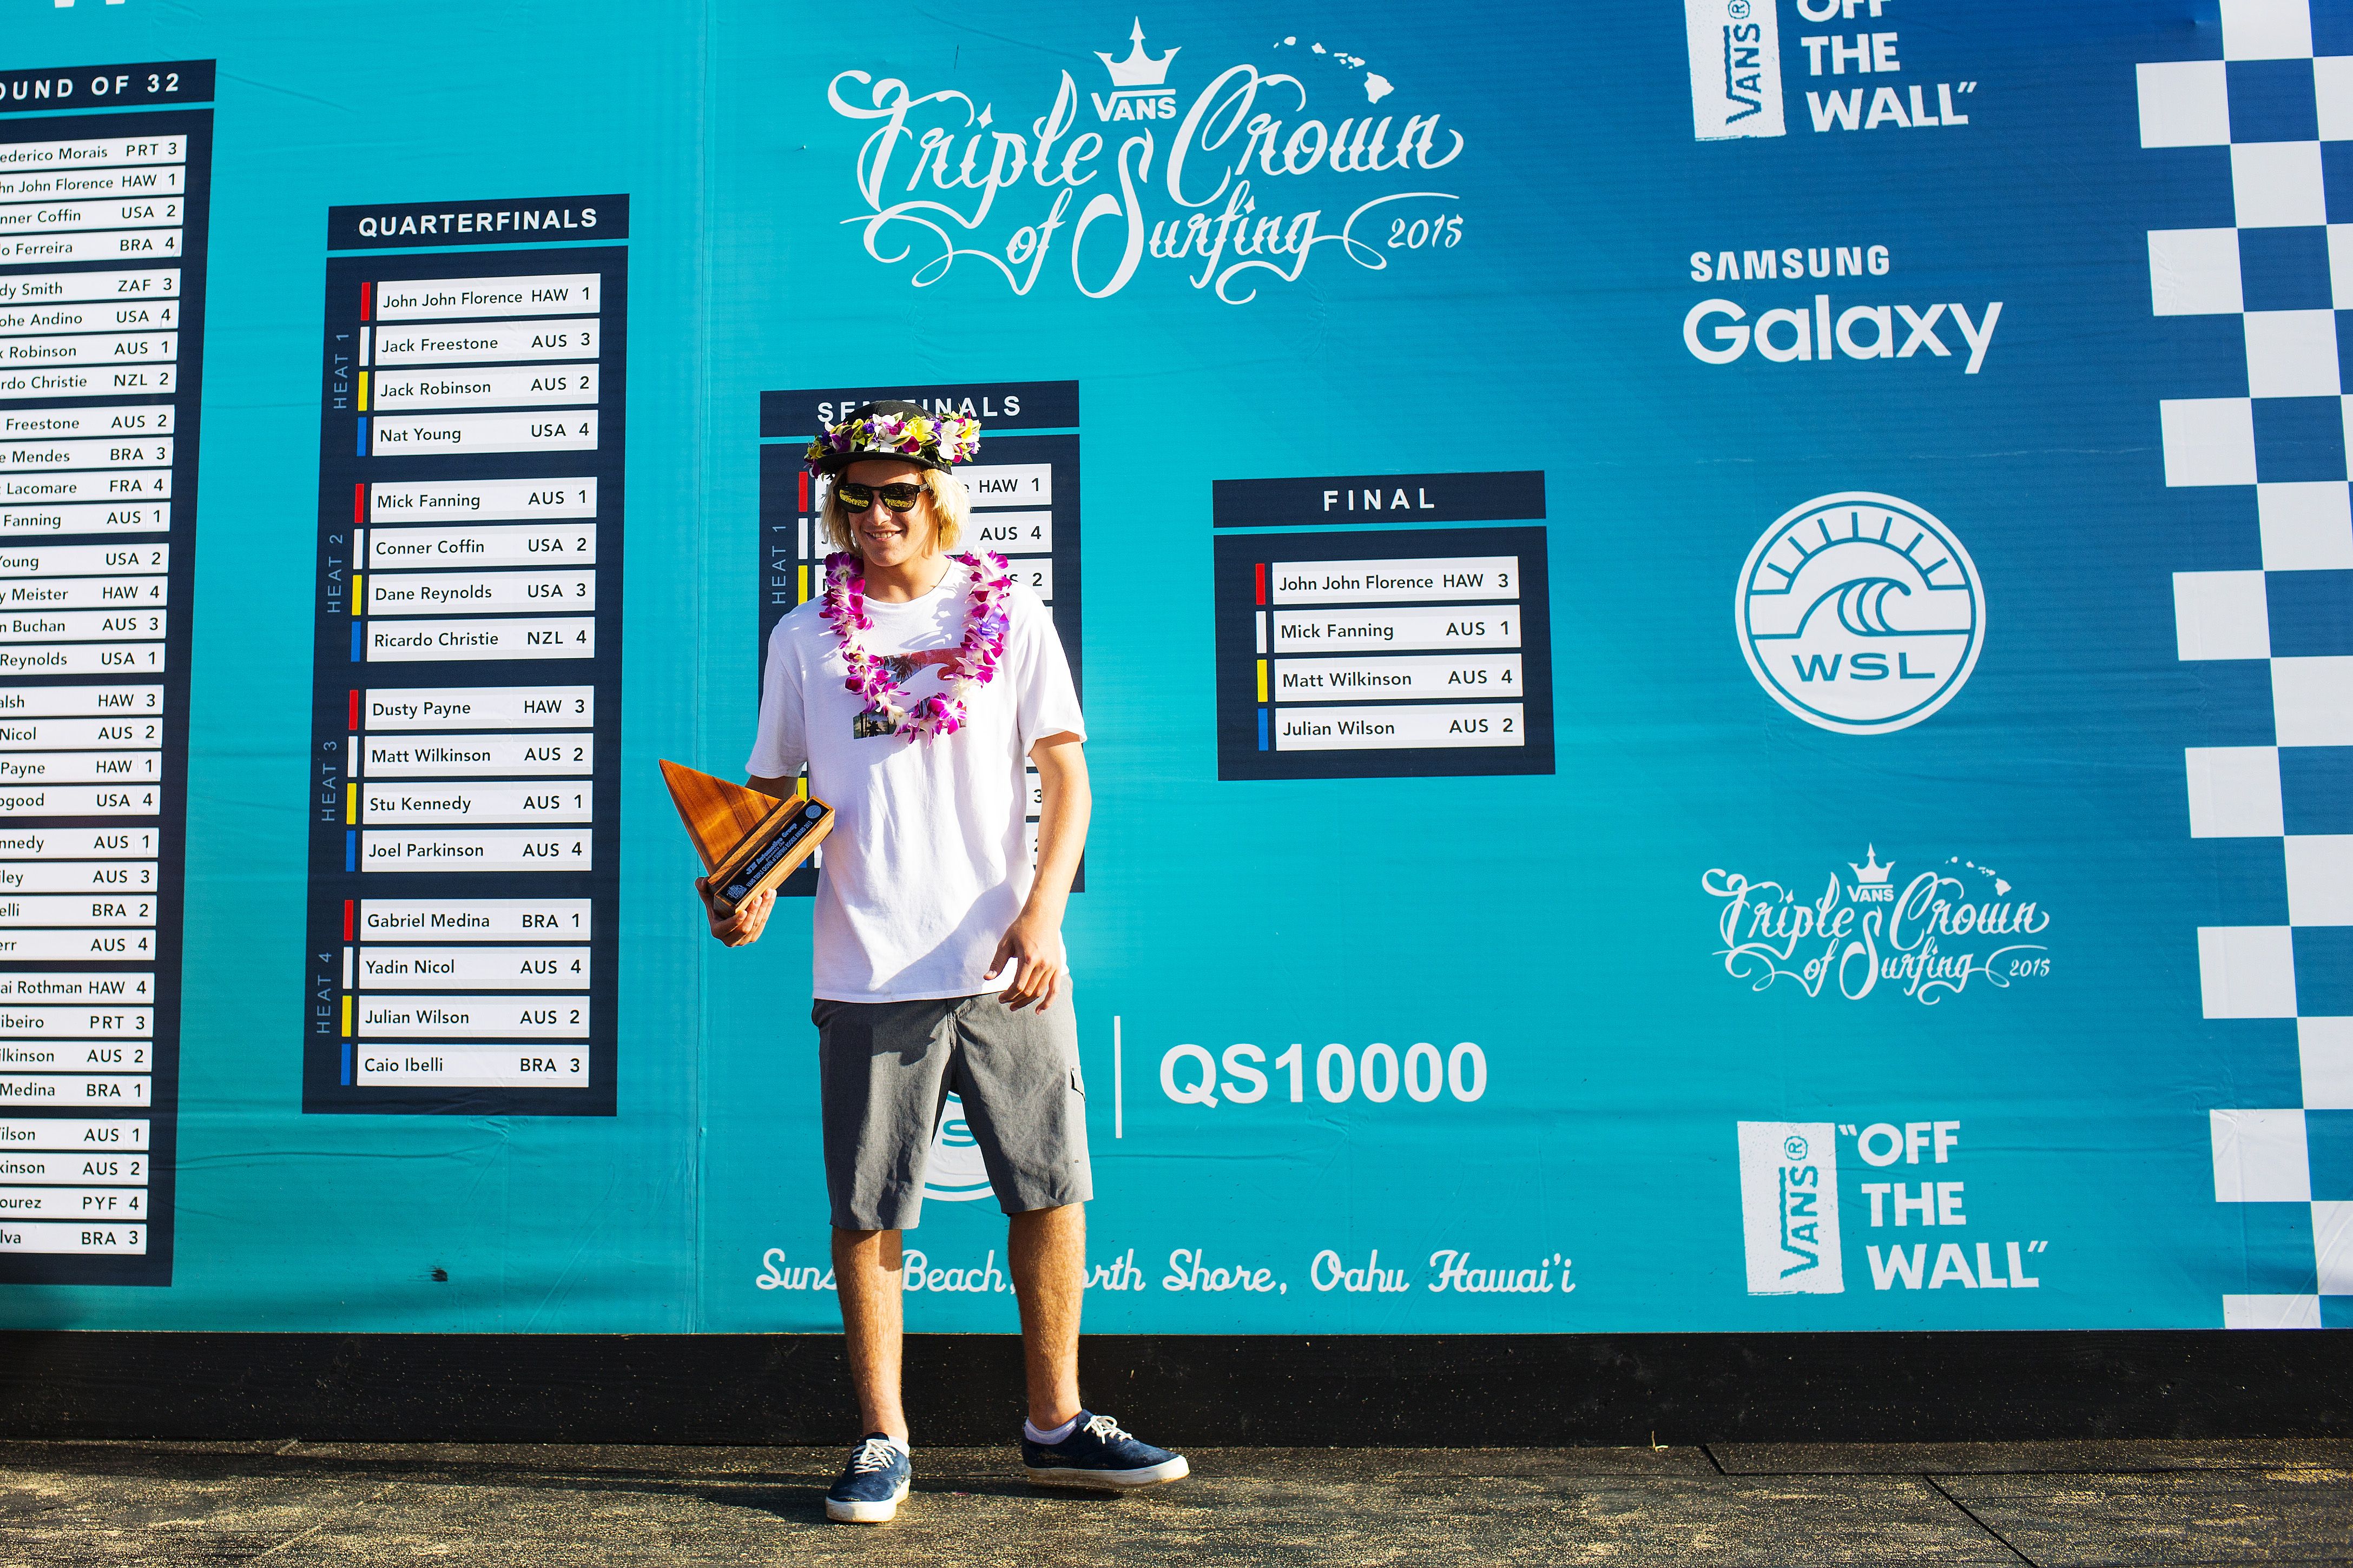 Jack Robinson of Australia winner of the JN Automotive Rookie of the Year Award at the Vans World Cup of Surfing at Sunset Beach, Oahu, Hawaii on Thursday December 3, 2015.